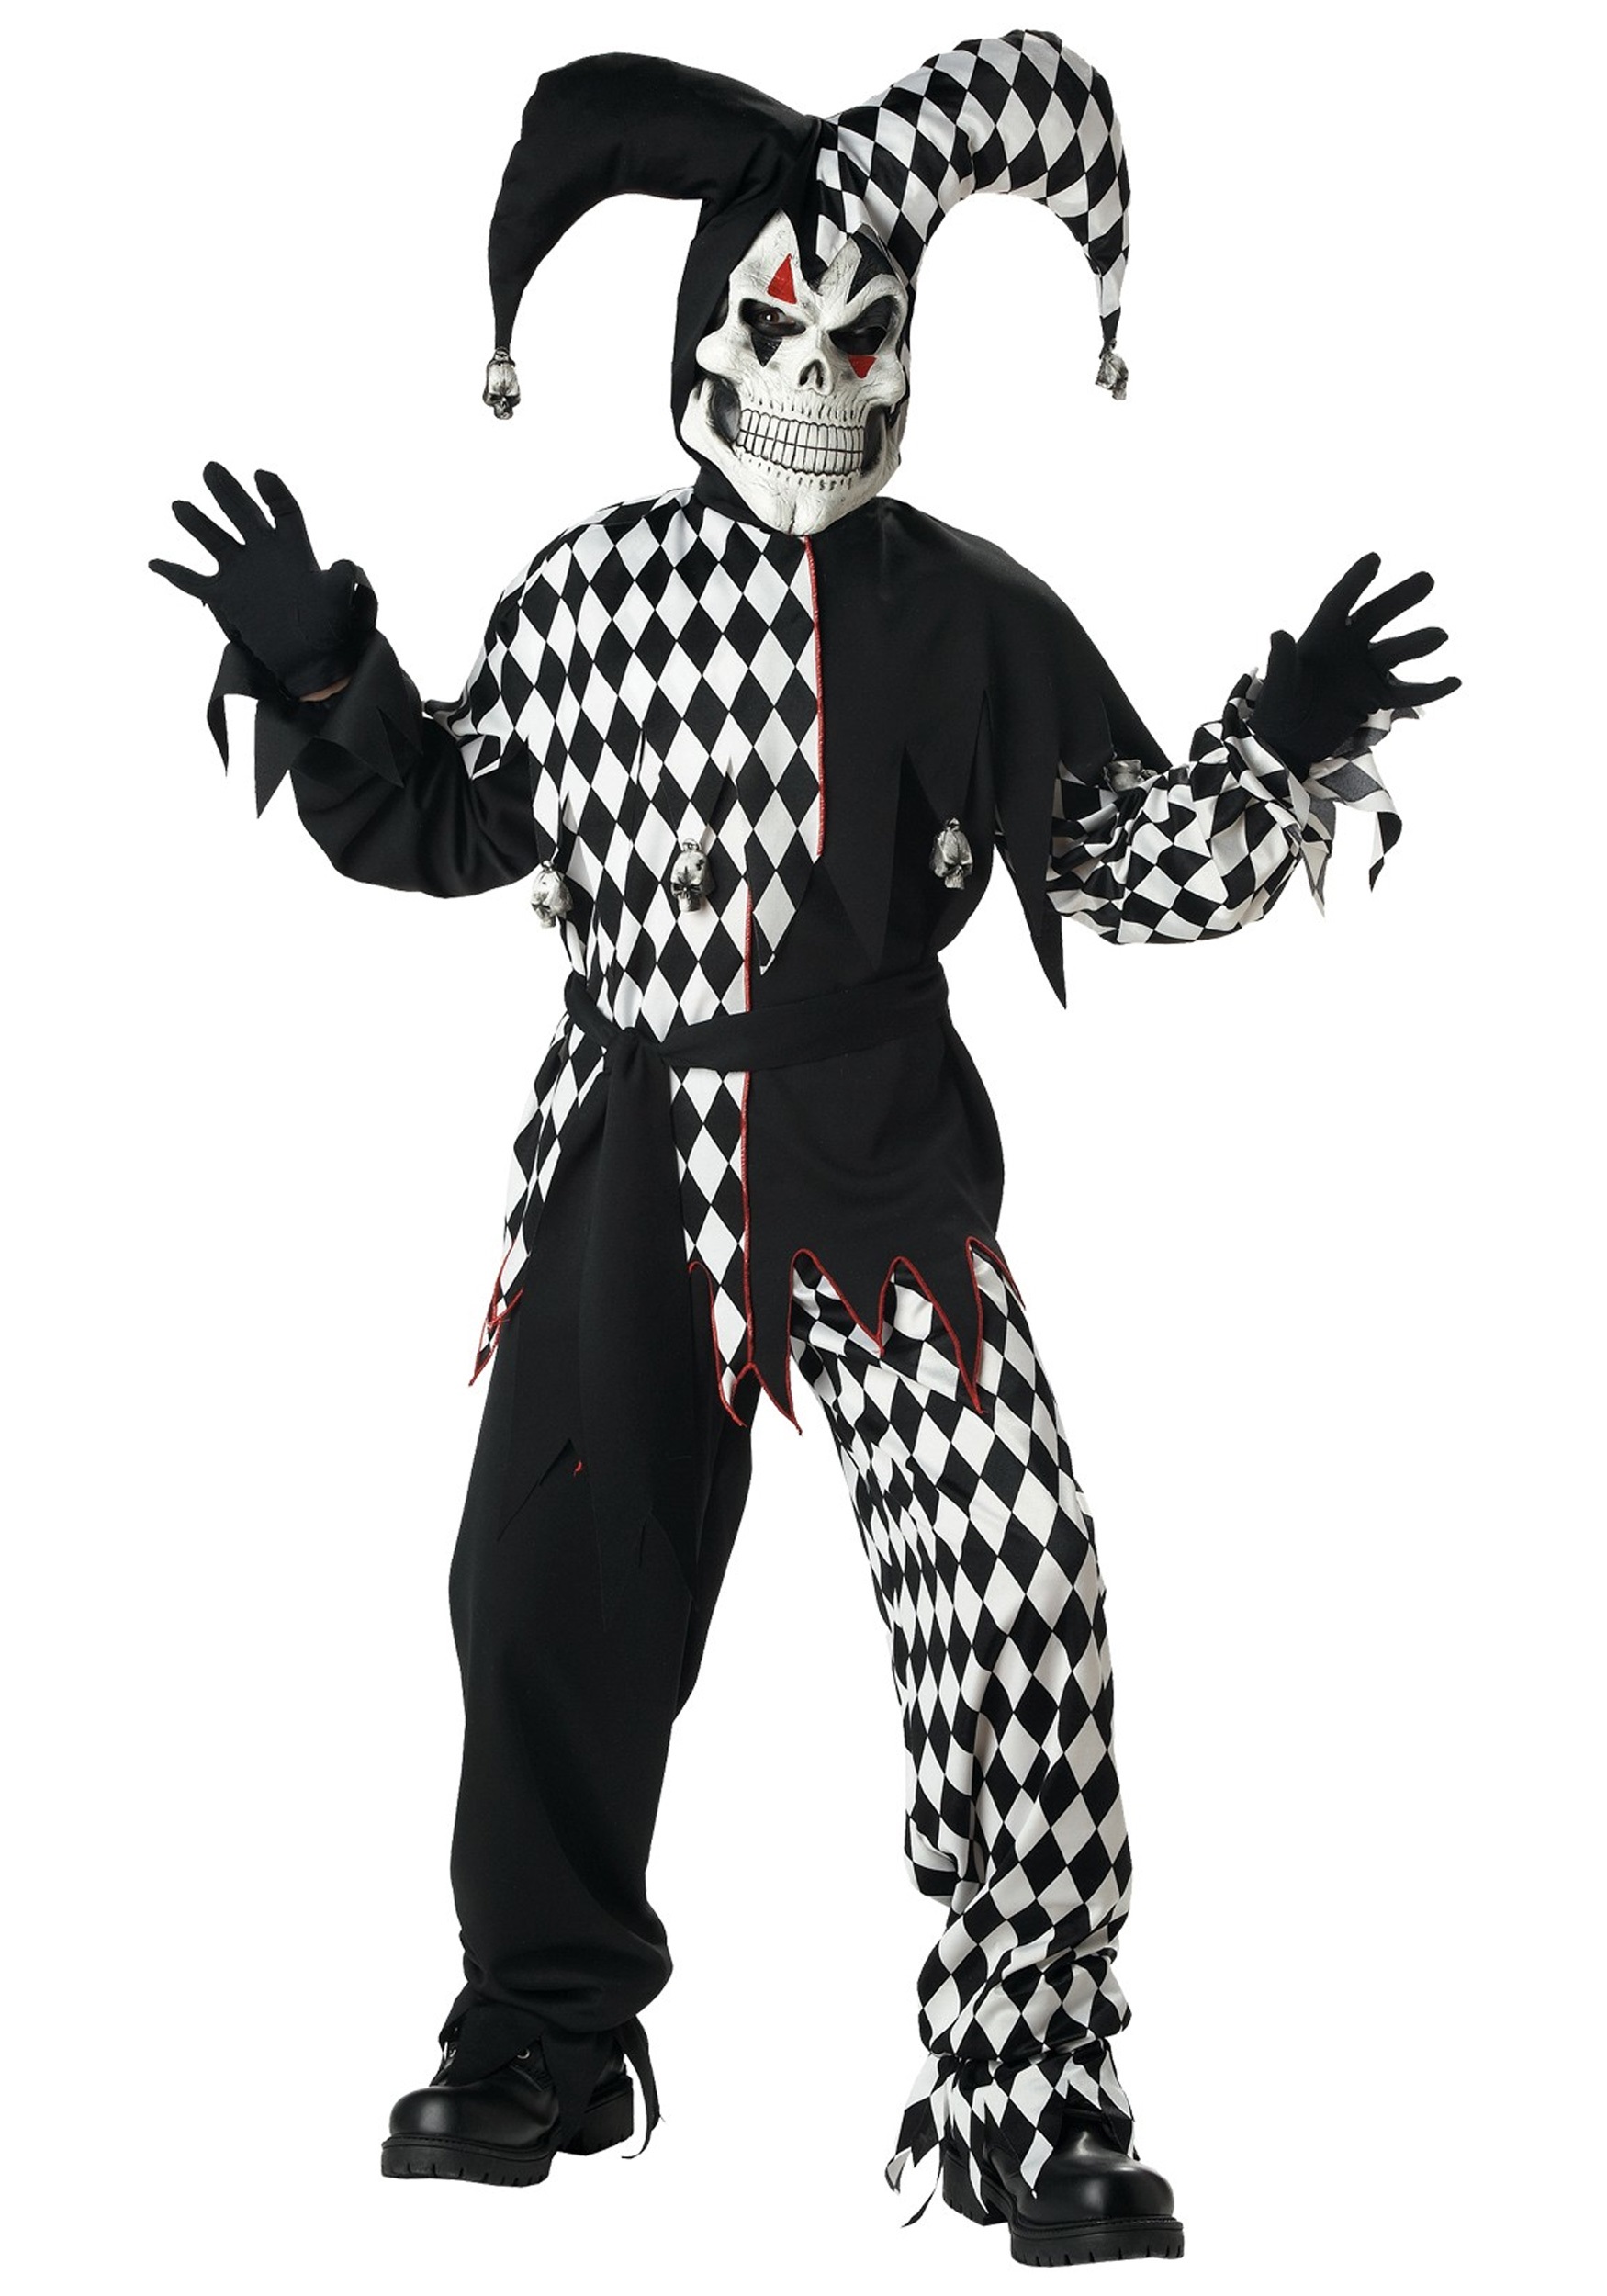 Photos - Fancy Dress California Costume Collection Dark Jester Costume for Kids Black/White 